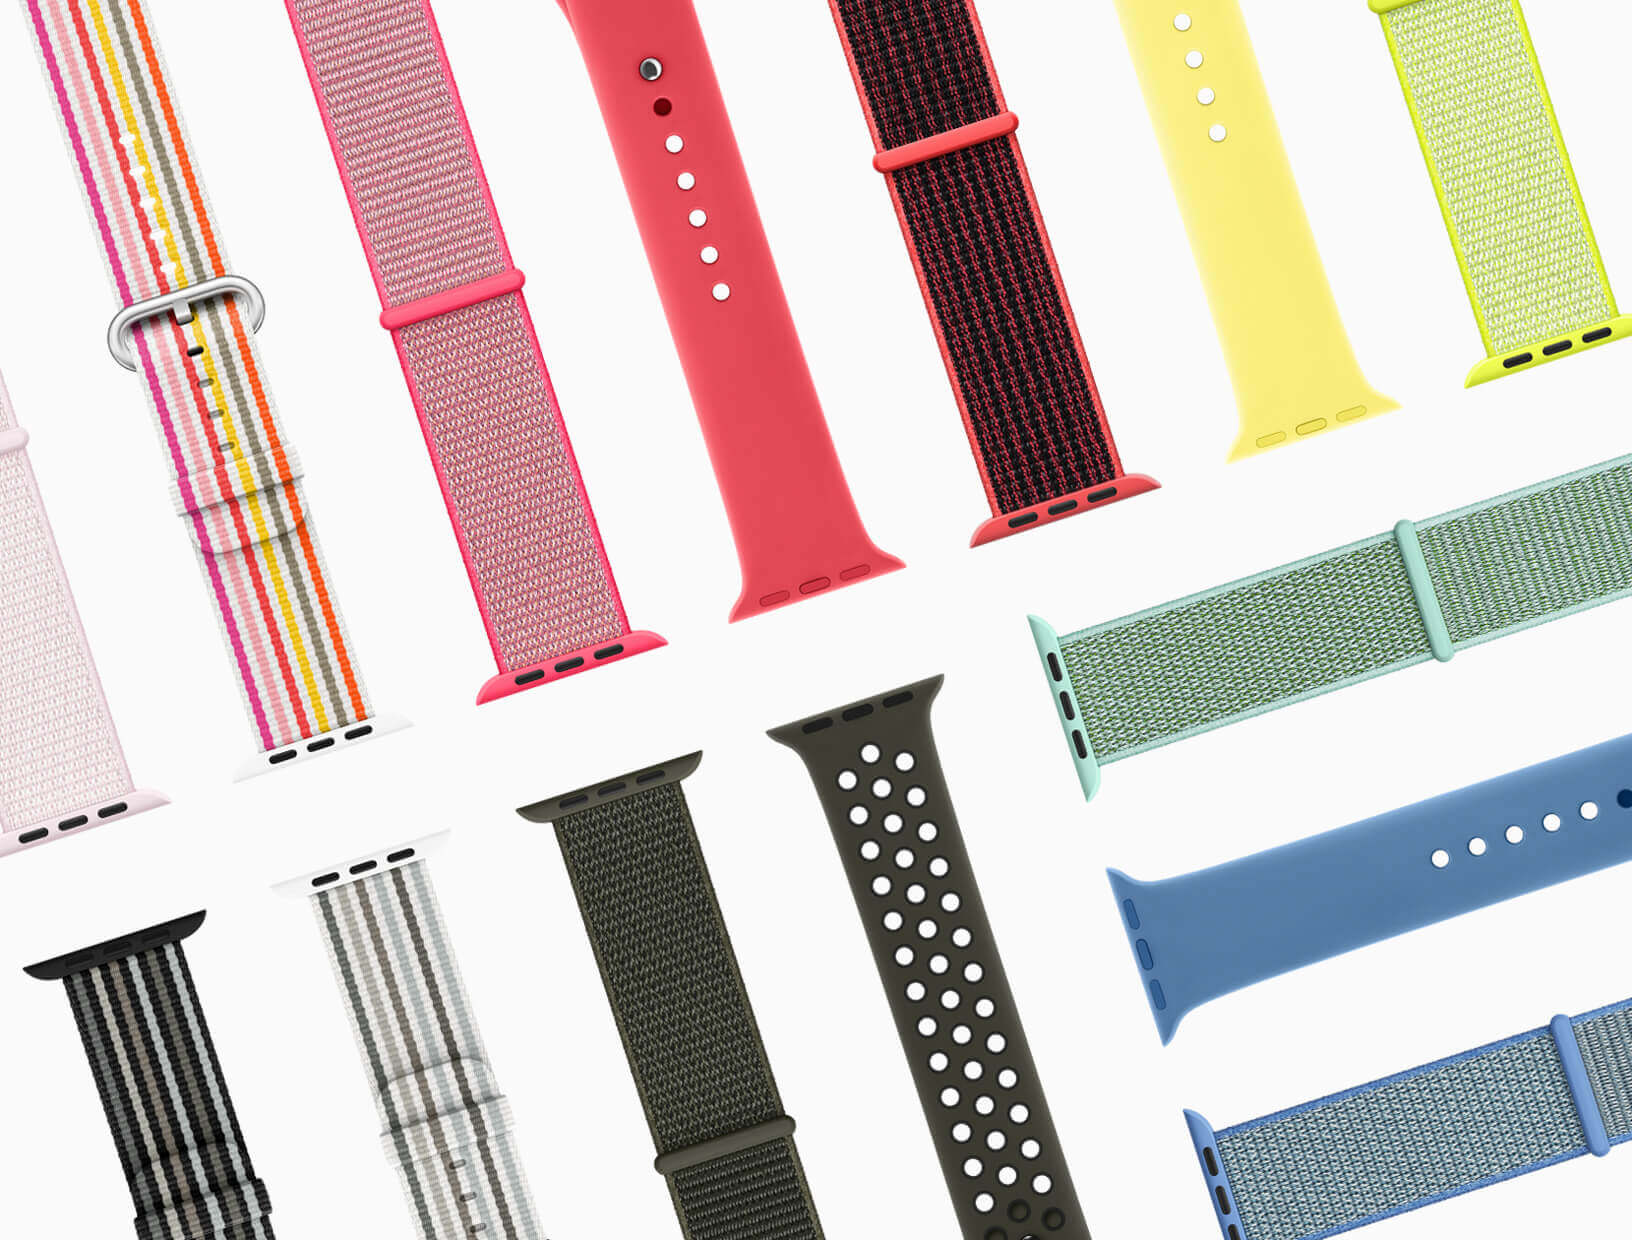 Apple releases Spring collection of watch bands